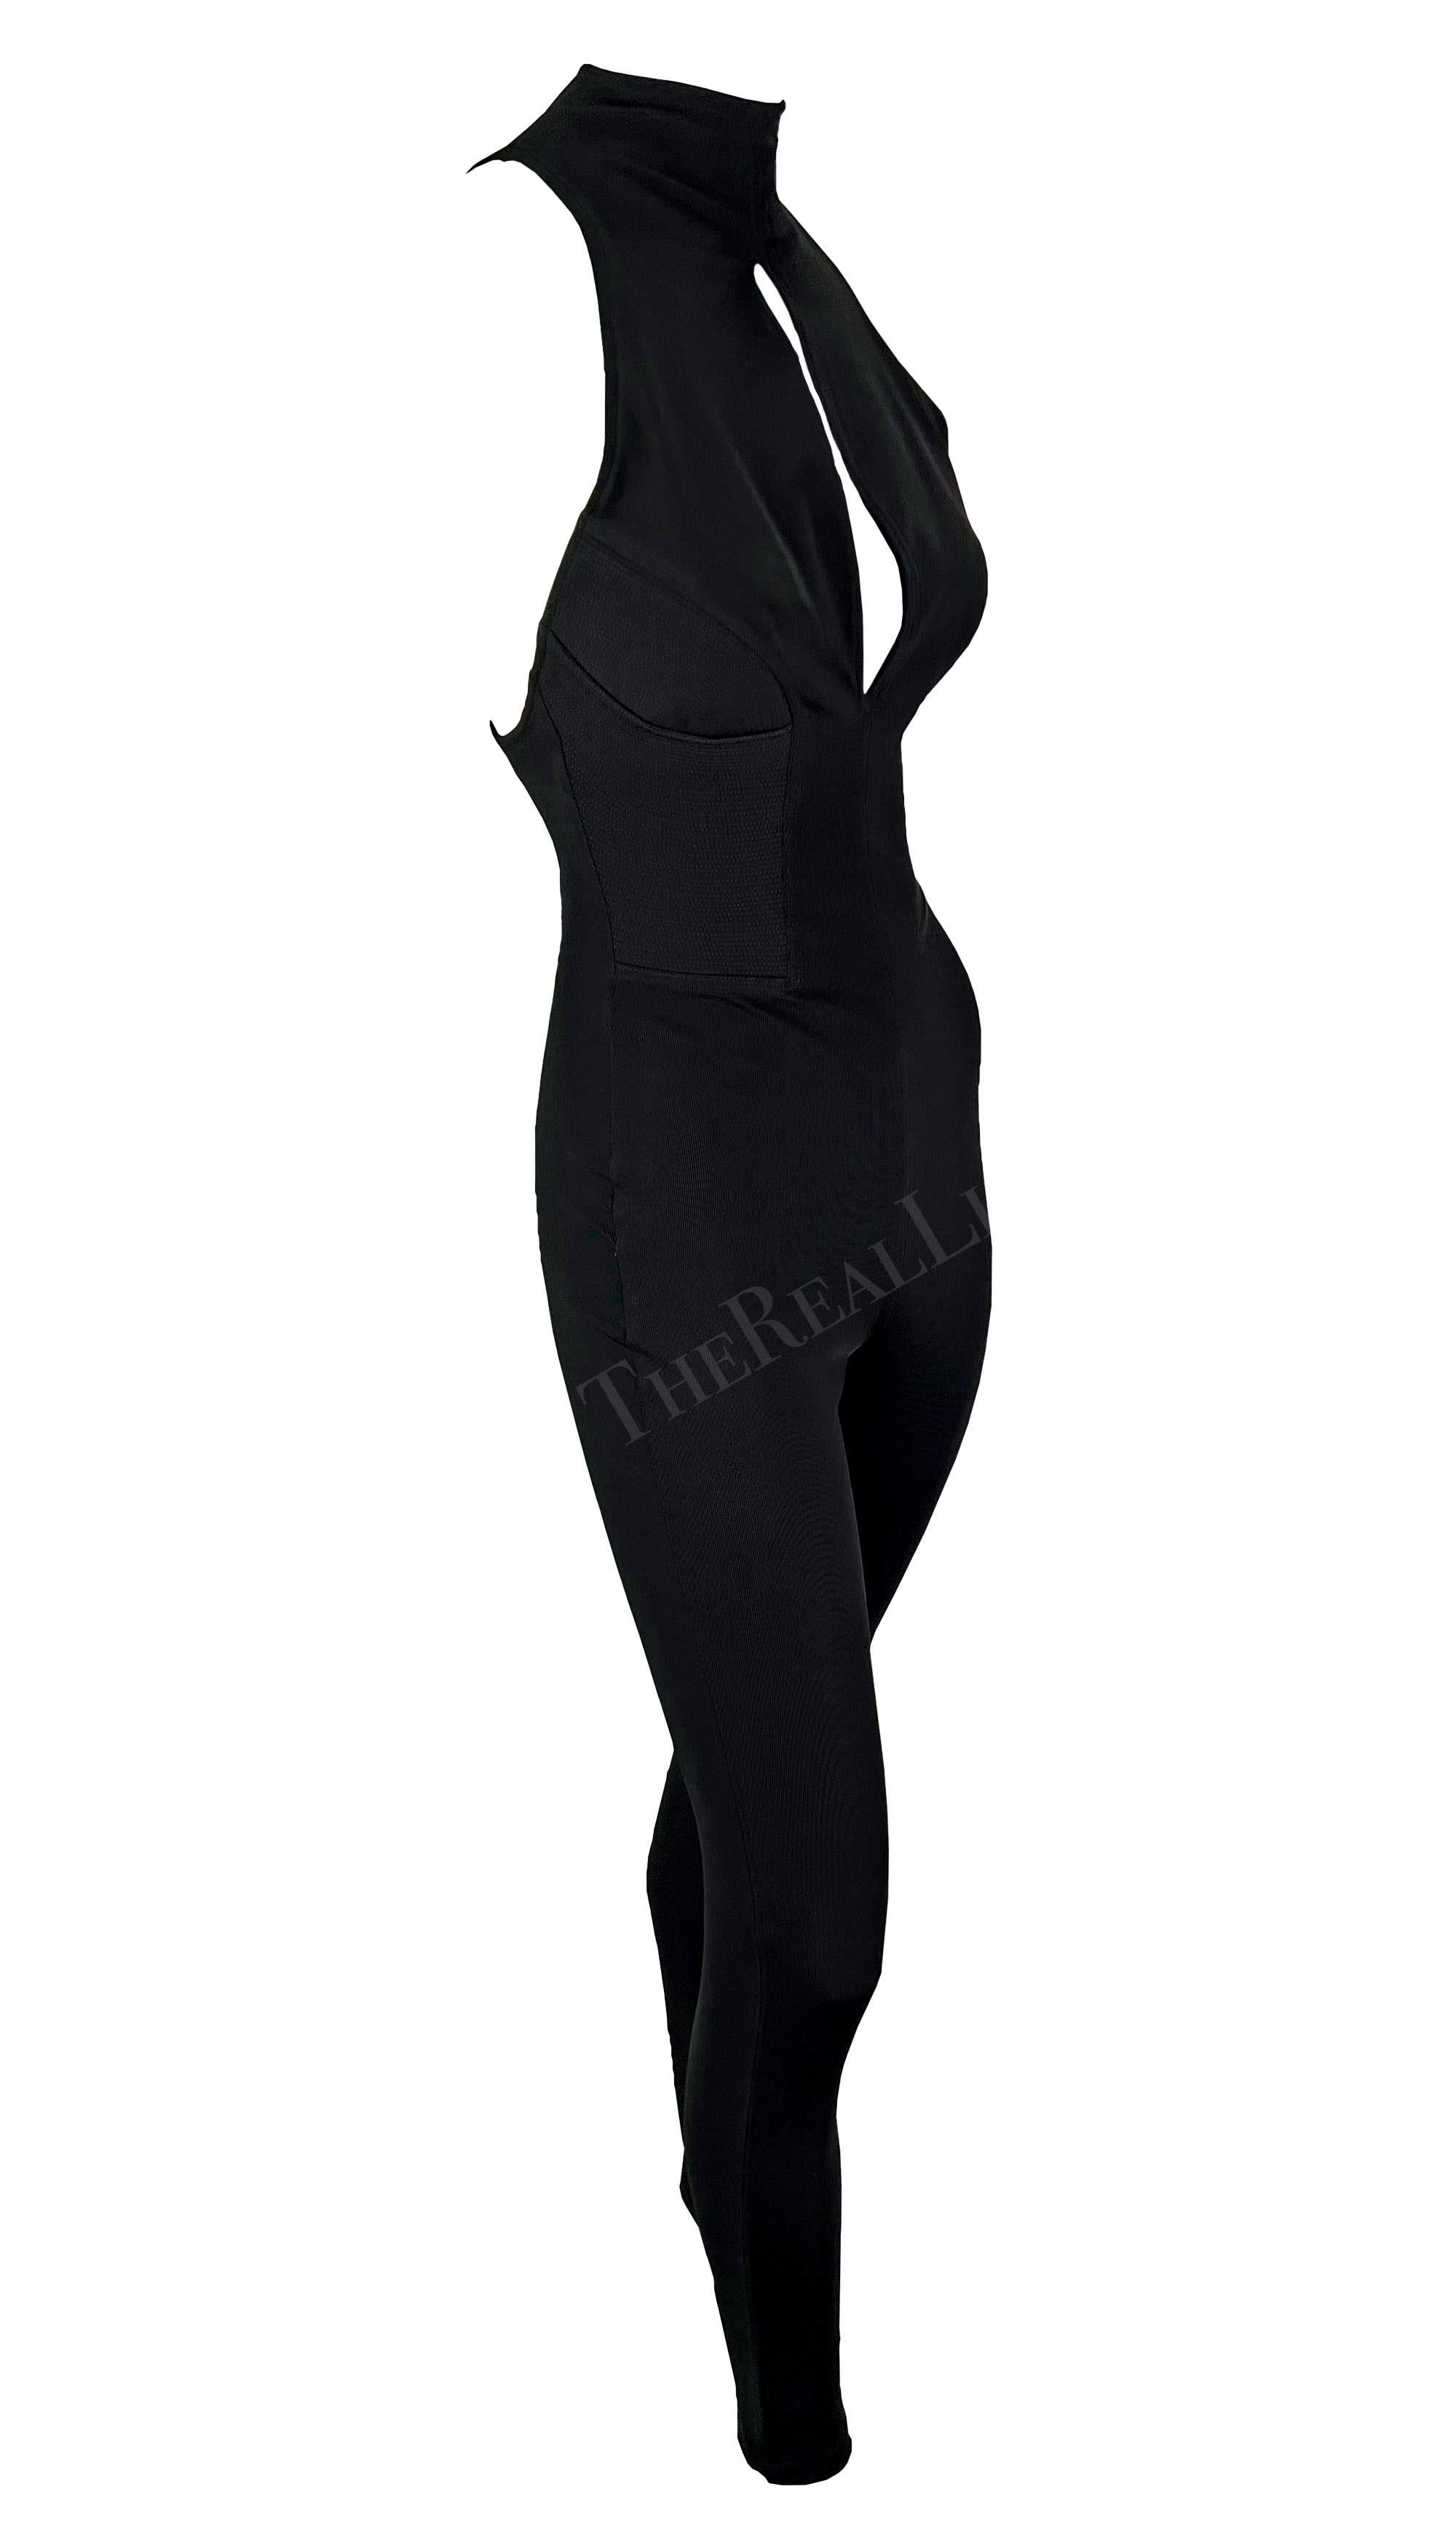 F/W 1991 Gianni Versace Runway Sleeveless Stretch Bodycon Ribbed Black Catsuit 6